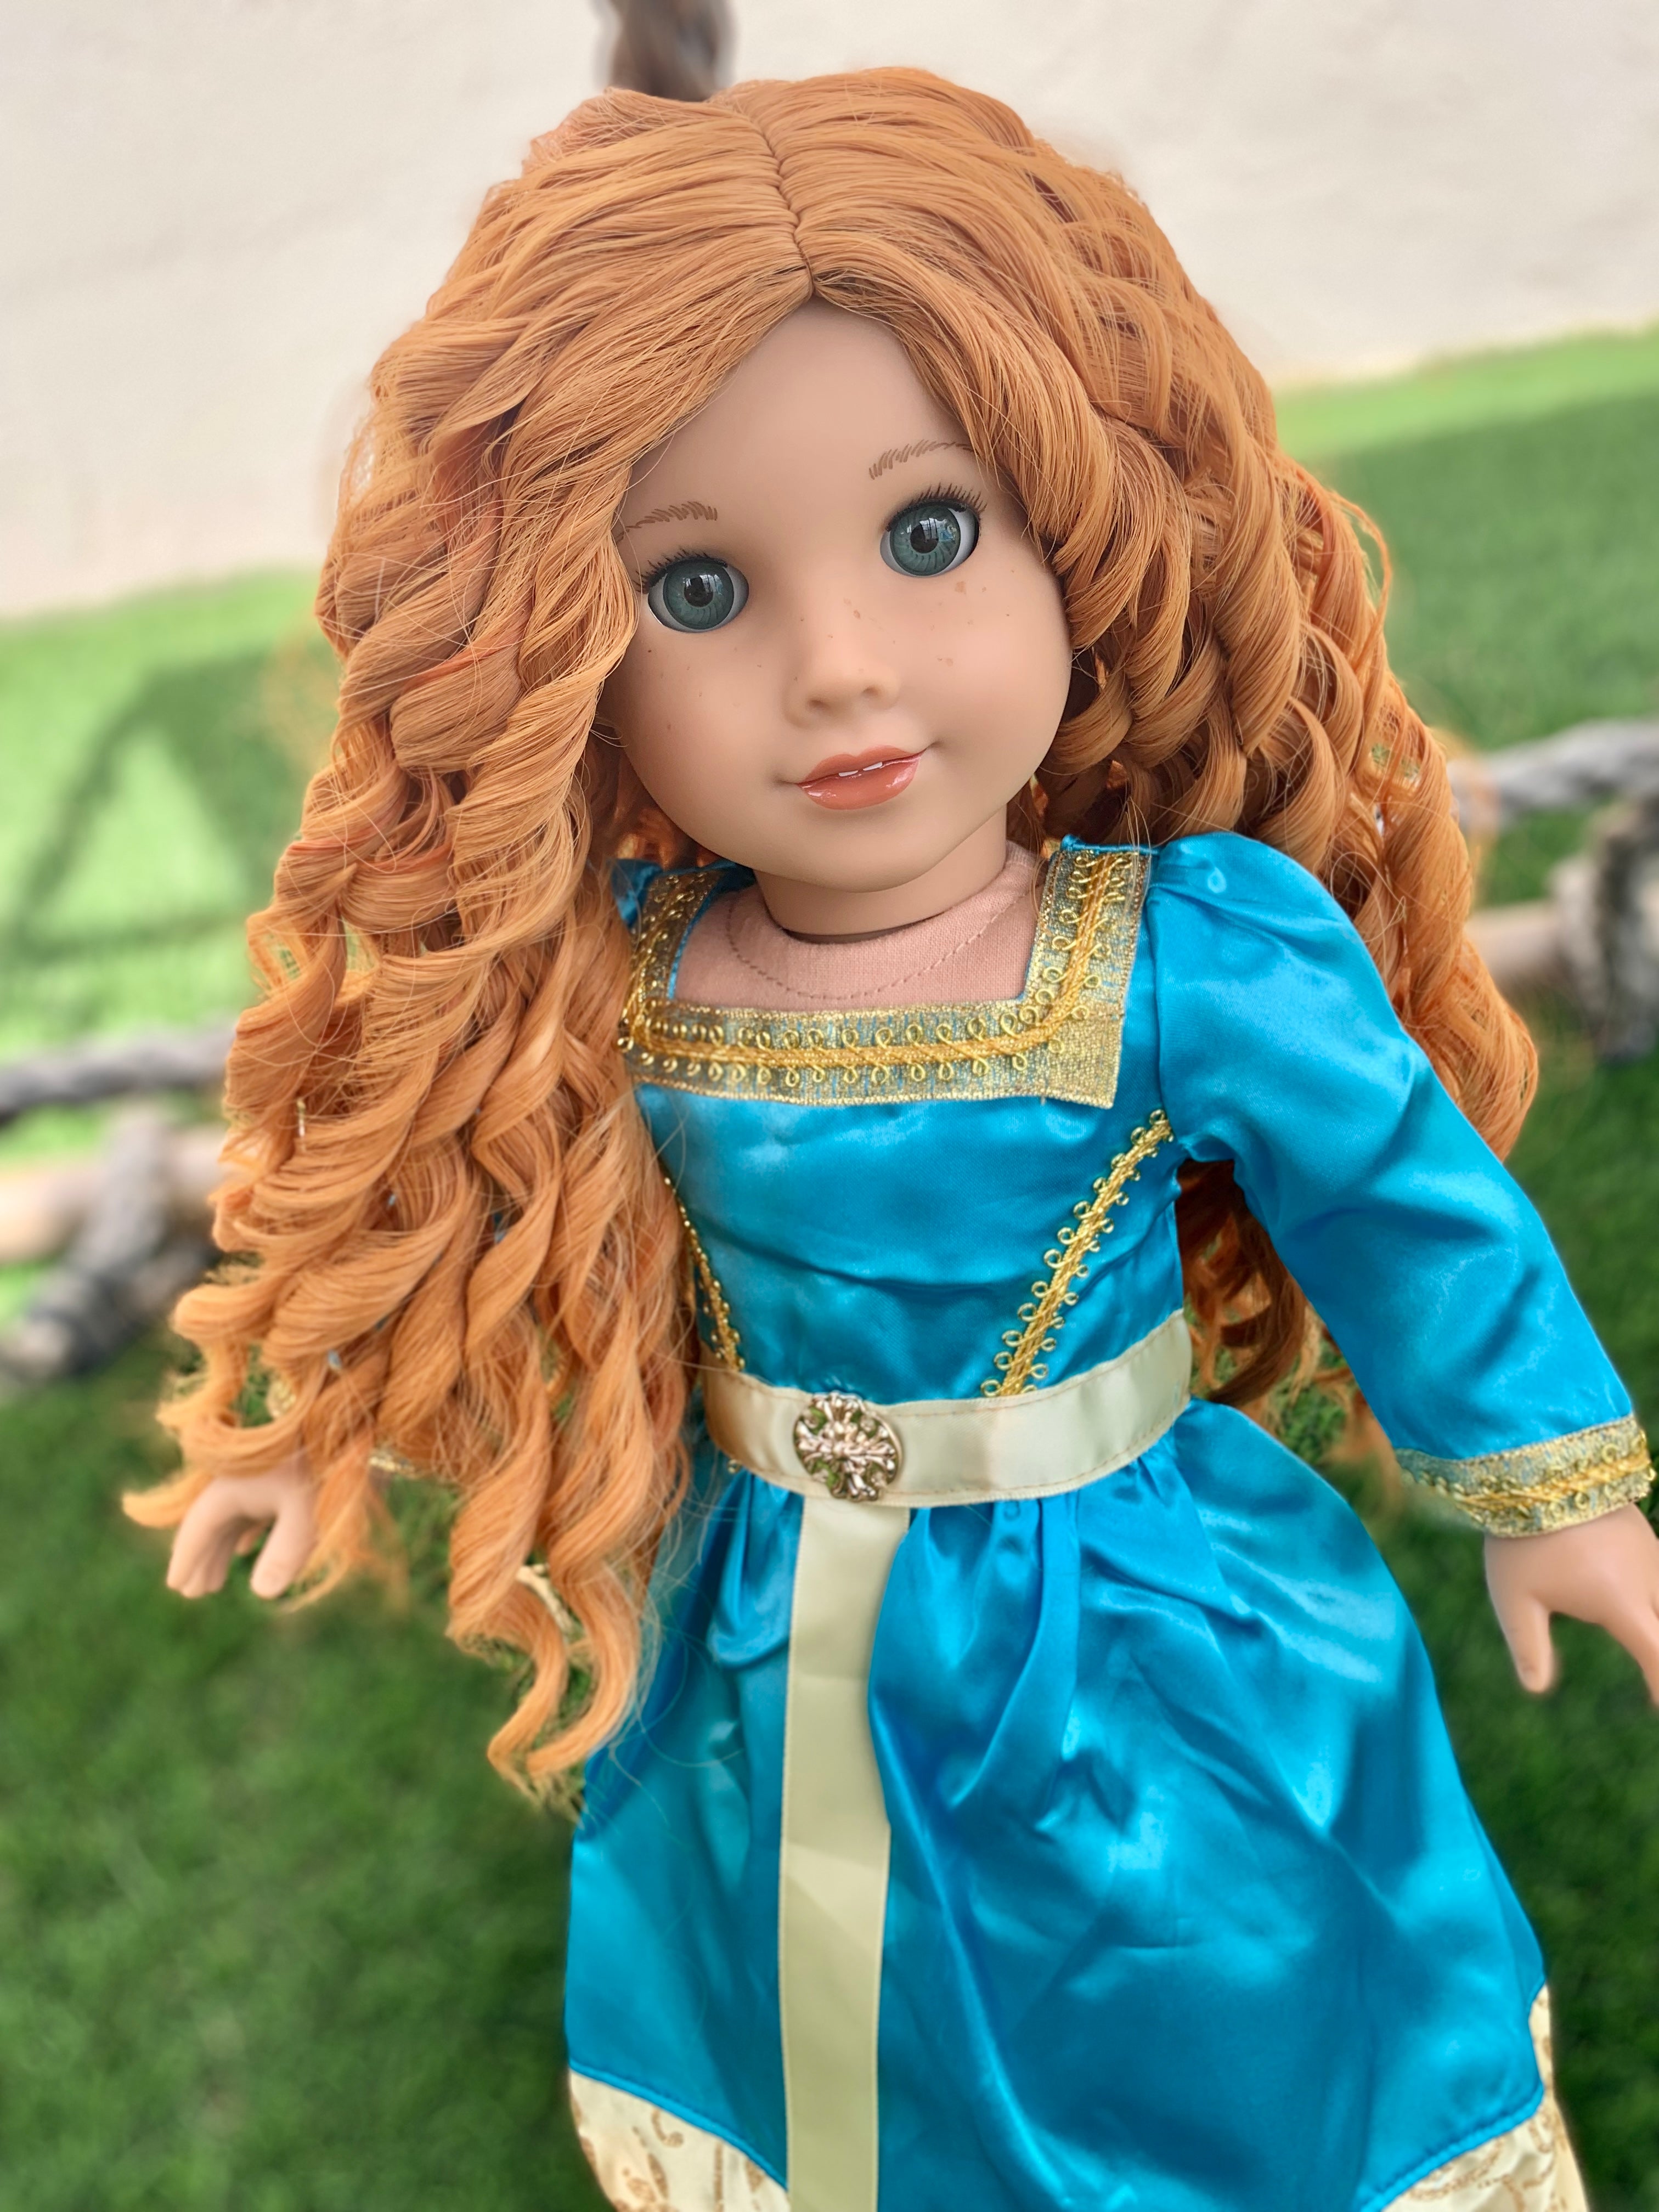 Zazou Dolls Exclusive  WIG Brave for 18 Inch dolls such as Our generation, Journey Girls and American Girl